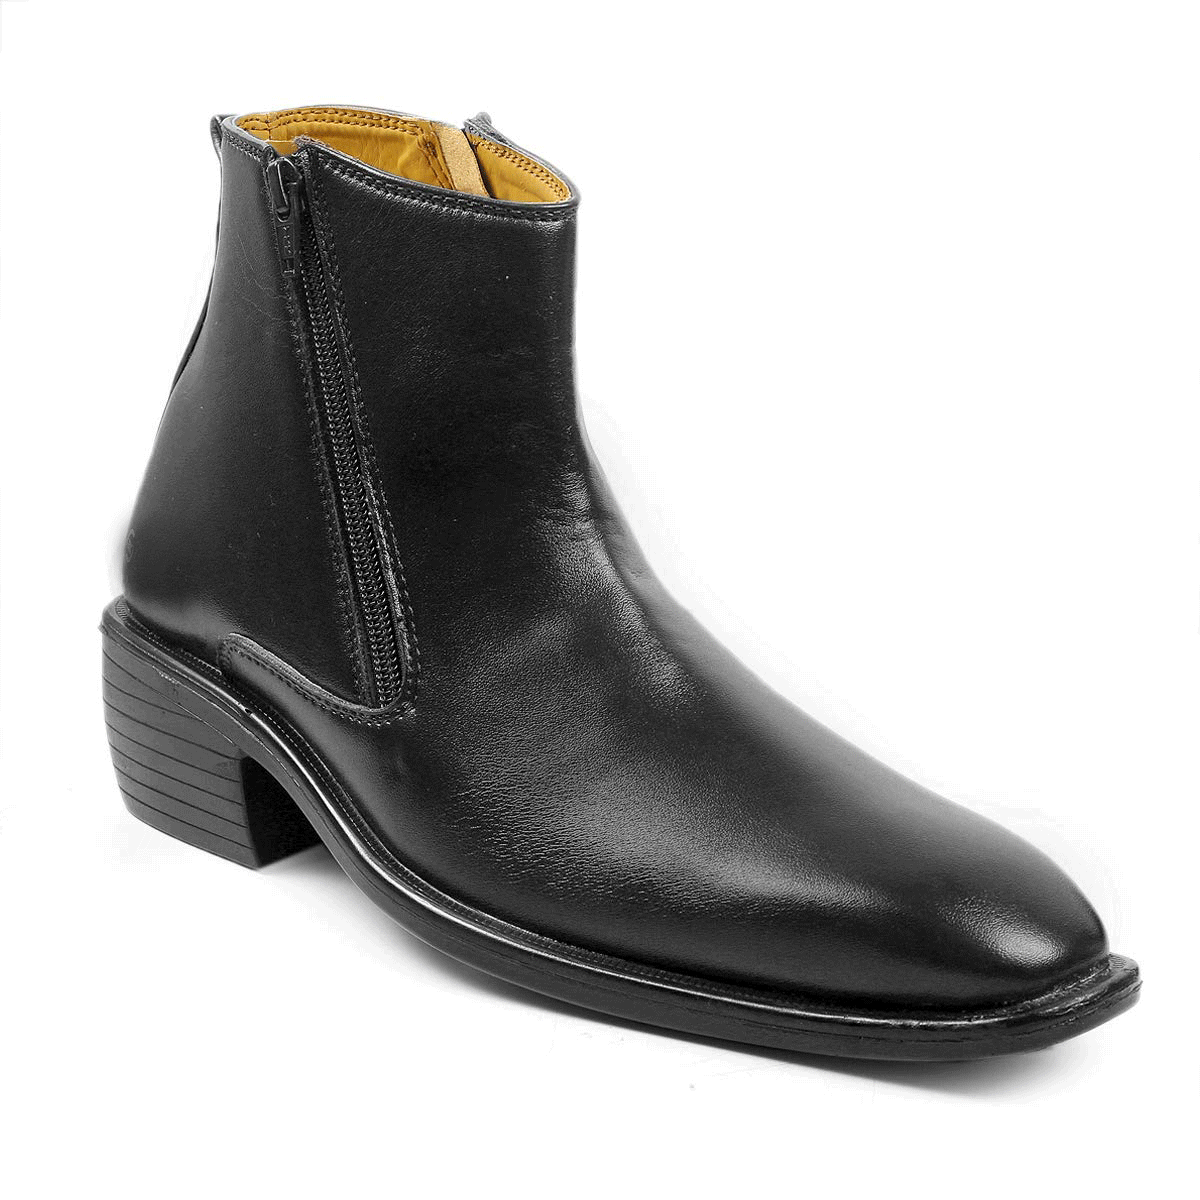 New Arrival Black Casual Formal Zipper Ankle Boots For Men-Unique and Classy